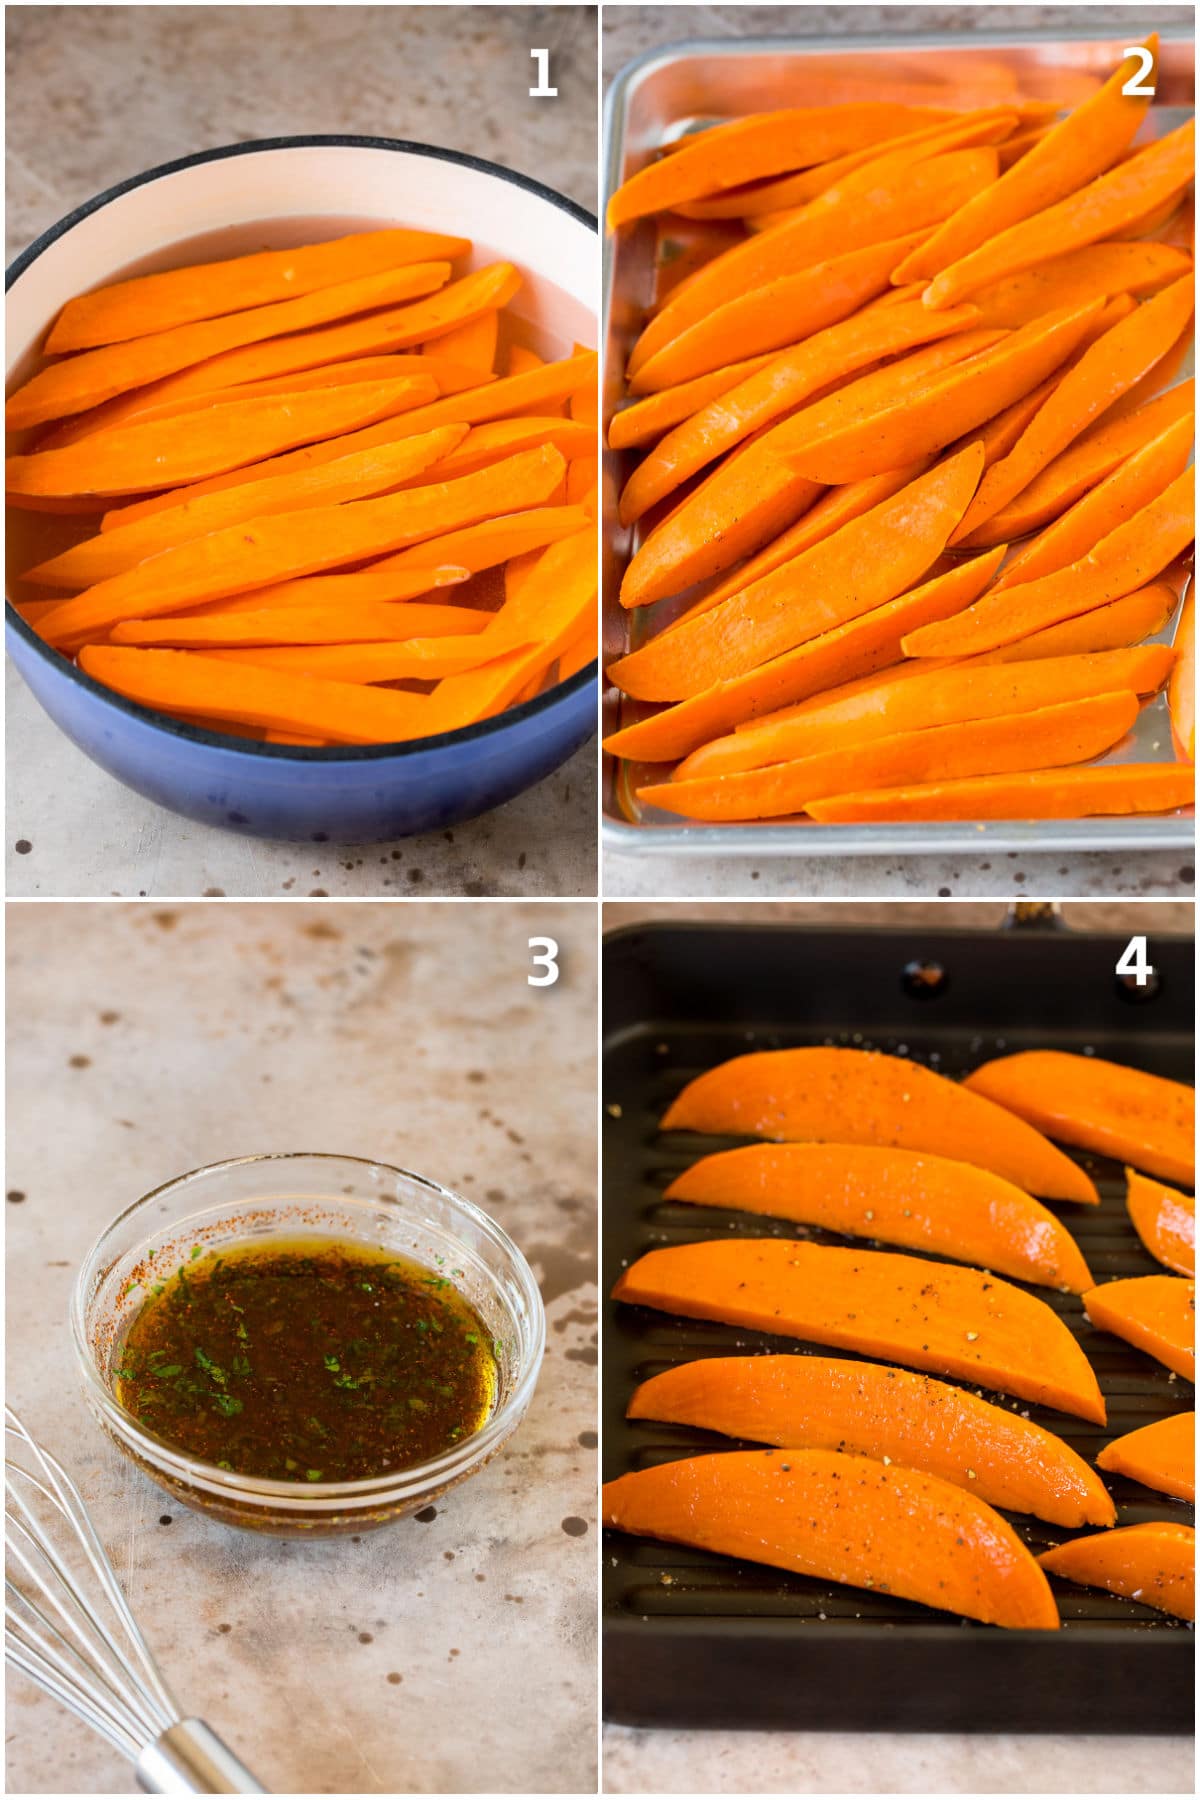 Process shots showing how to prepare sweet potatoes for the grill.